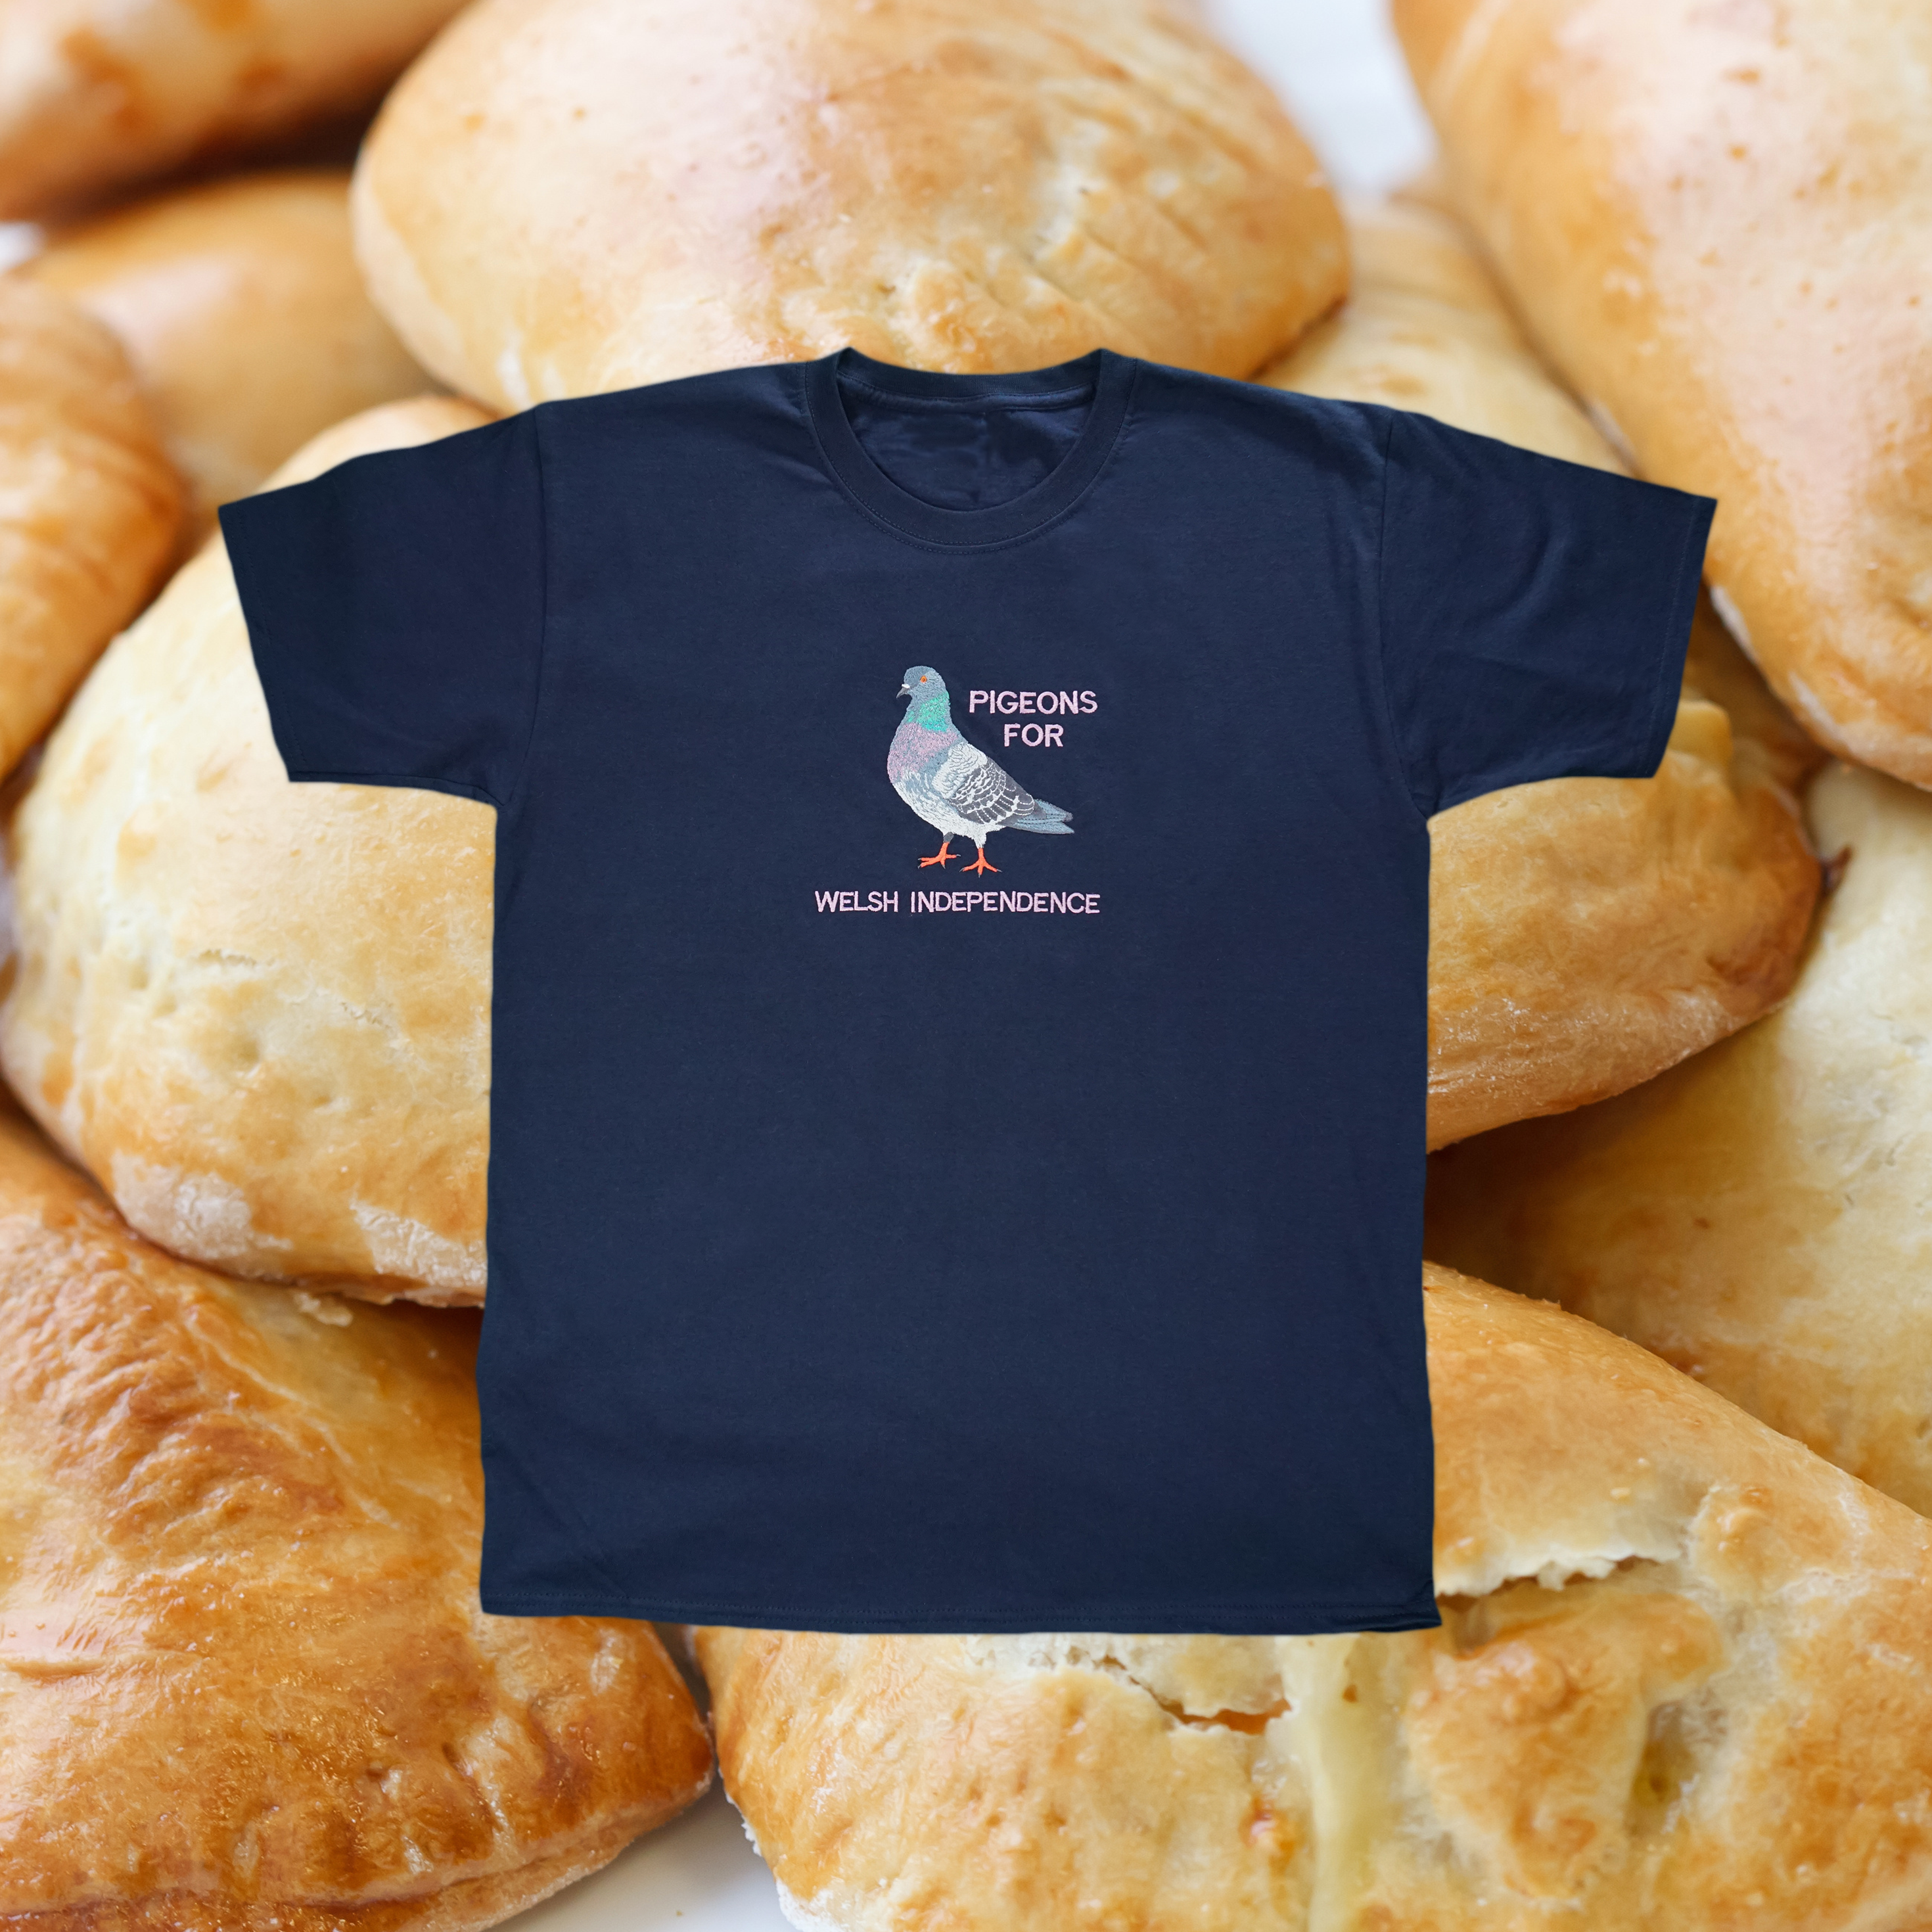 PIGEONS FOR WELSH INDEPENDENCE T-SHIRT